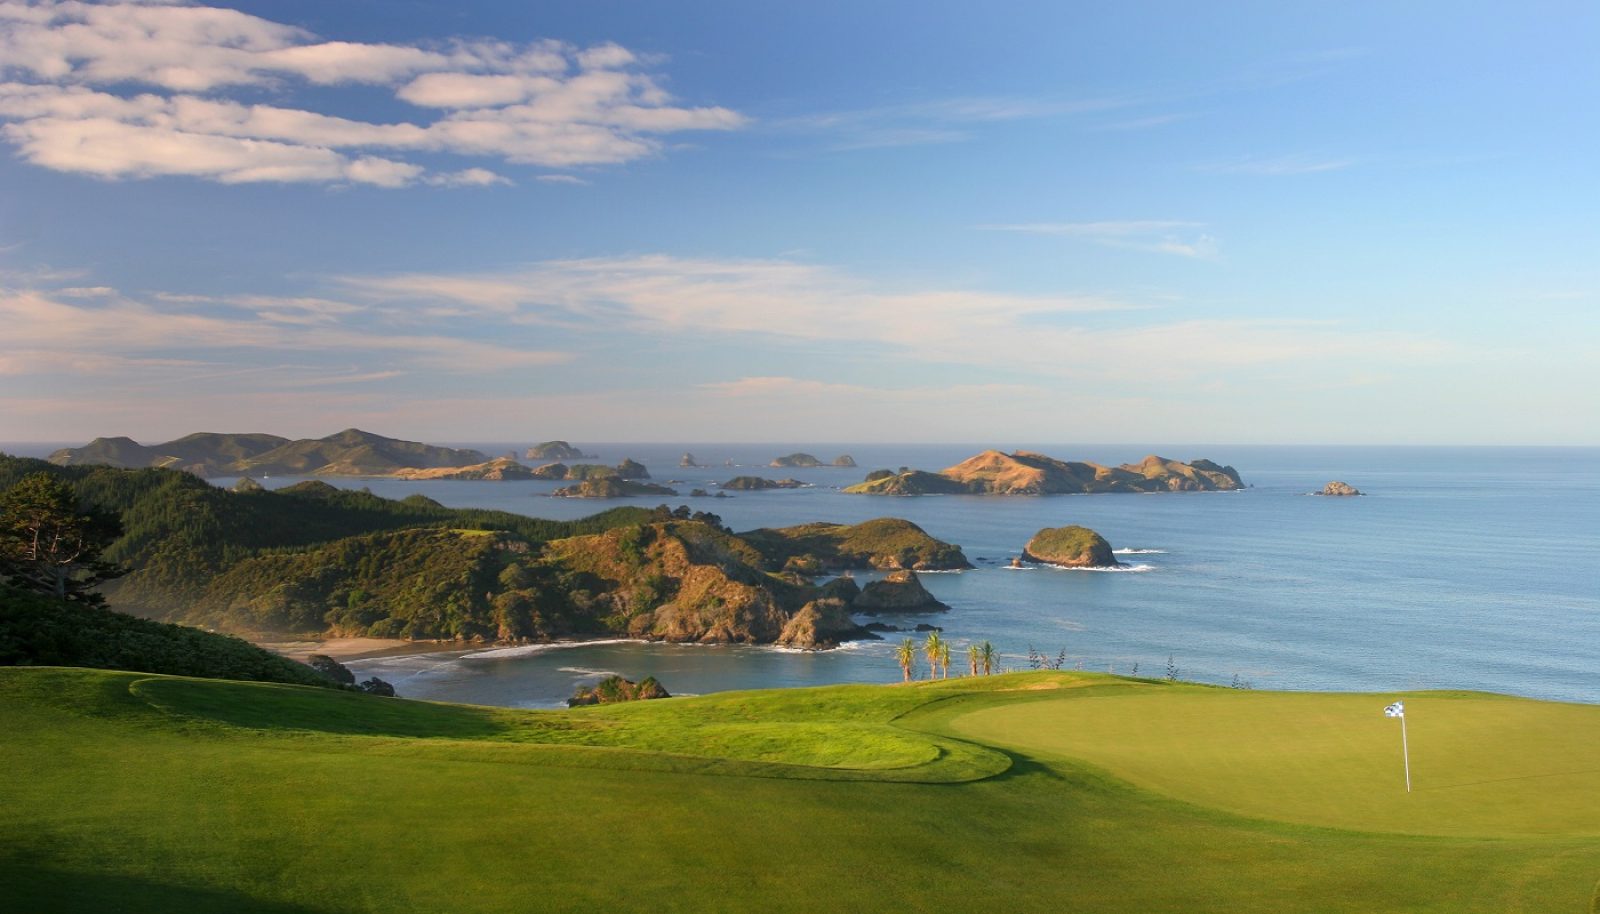 Kauri Cliffs Golf Course overlooking the Cavalli Islands in the Bay of Islands